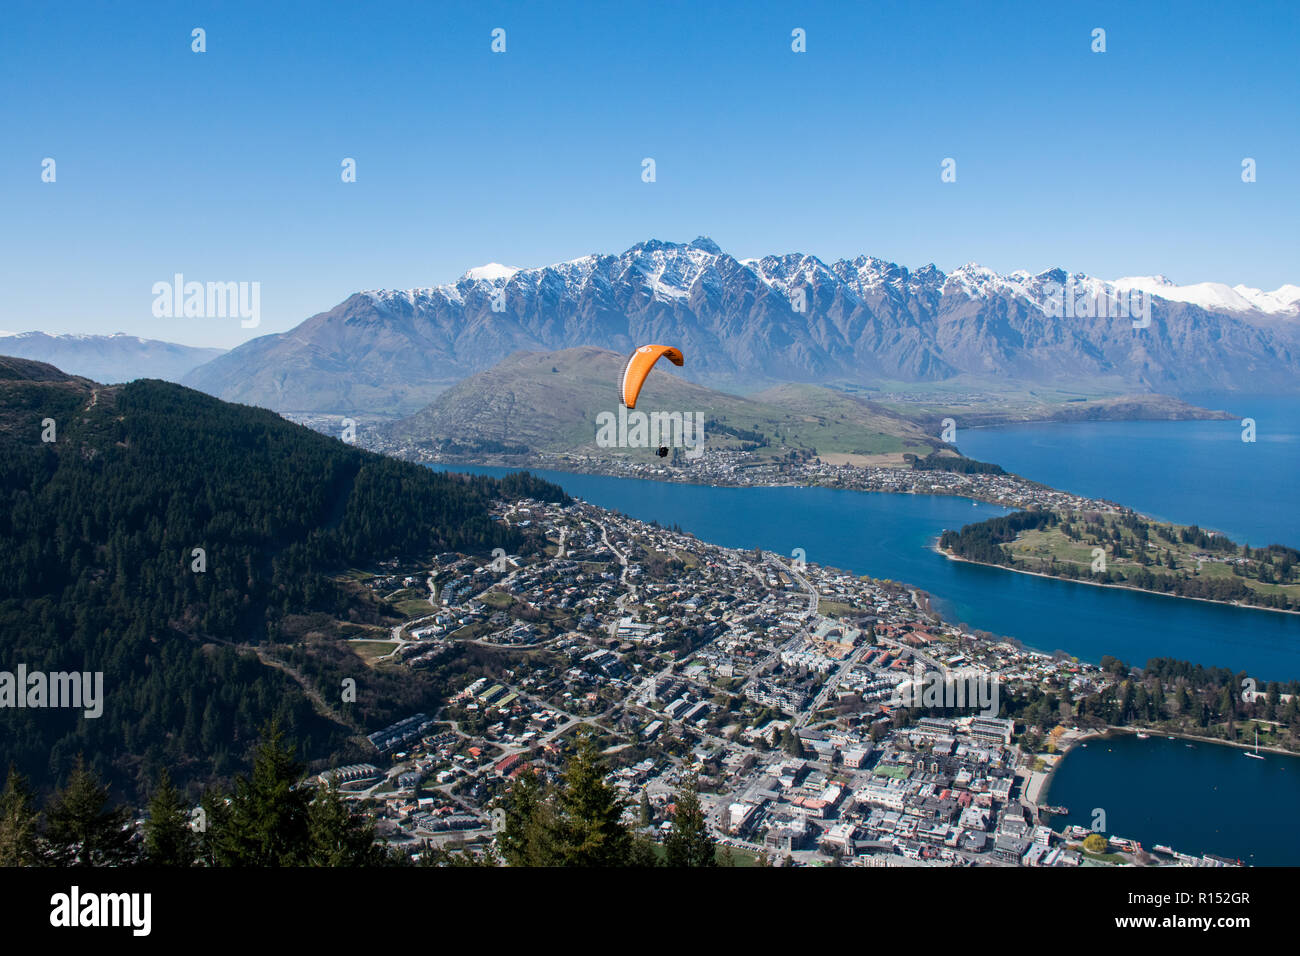 Paraglider flying over Queenstown, New Zealand, with snow capped mountains in the back Stock Photo